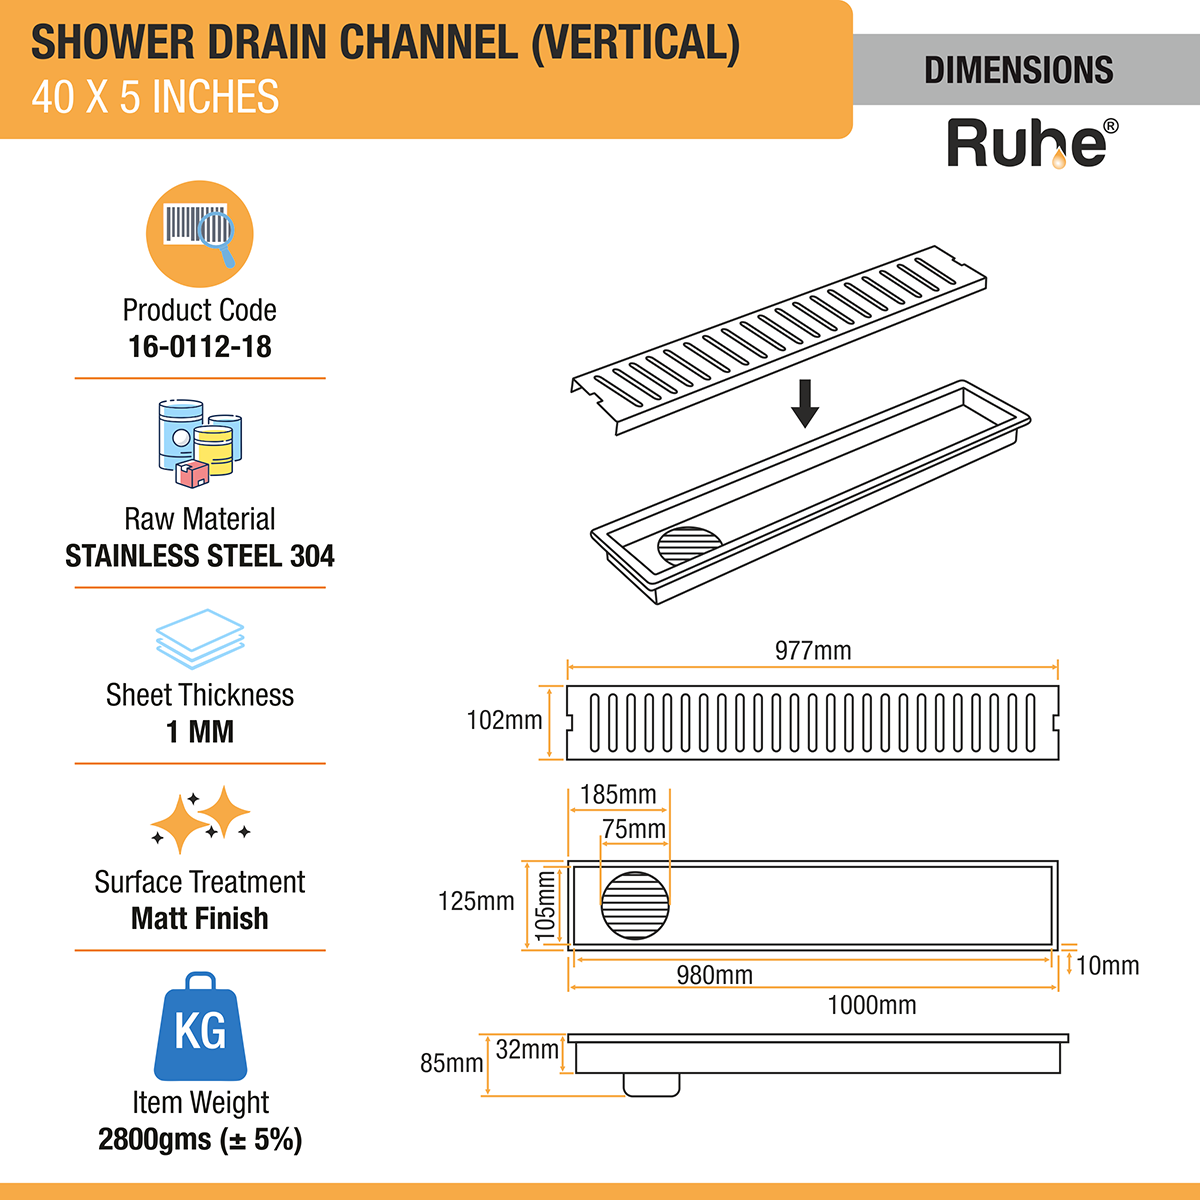 Vertical Shower Drain Channel (40 x 5 Inches) with Cockroach Trap (304 Grade) dimensions and size